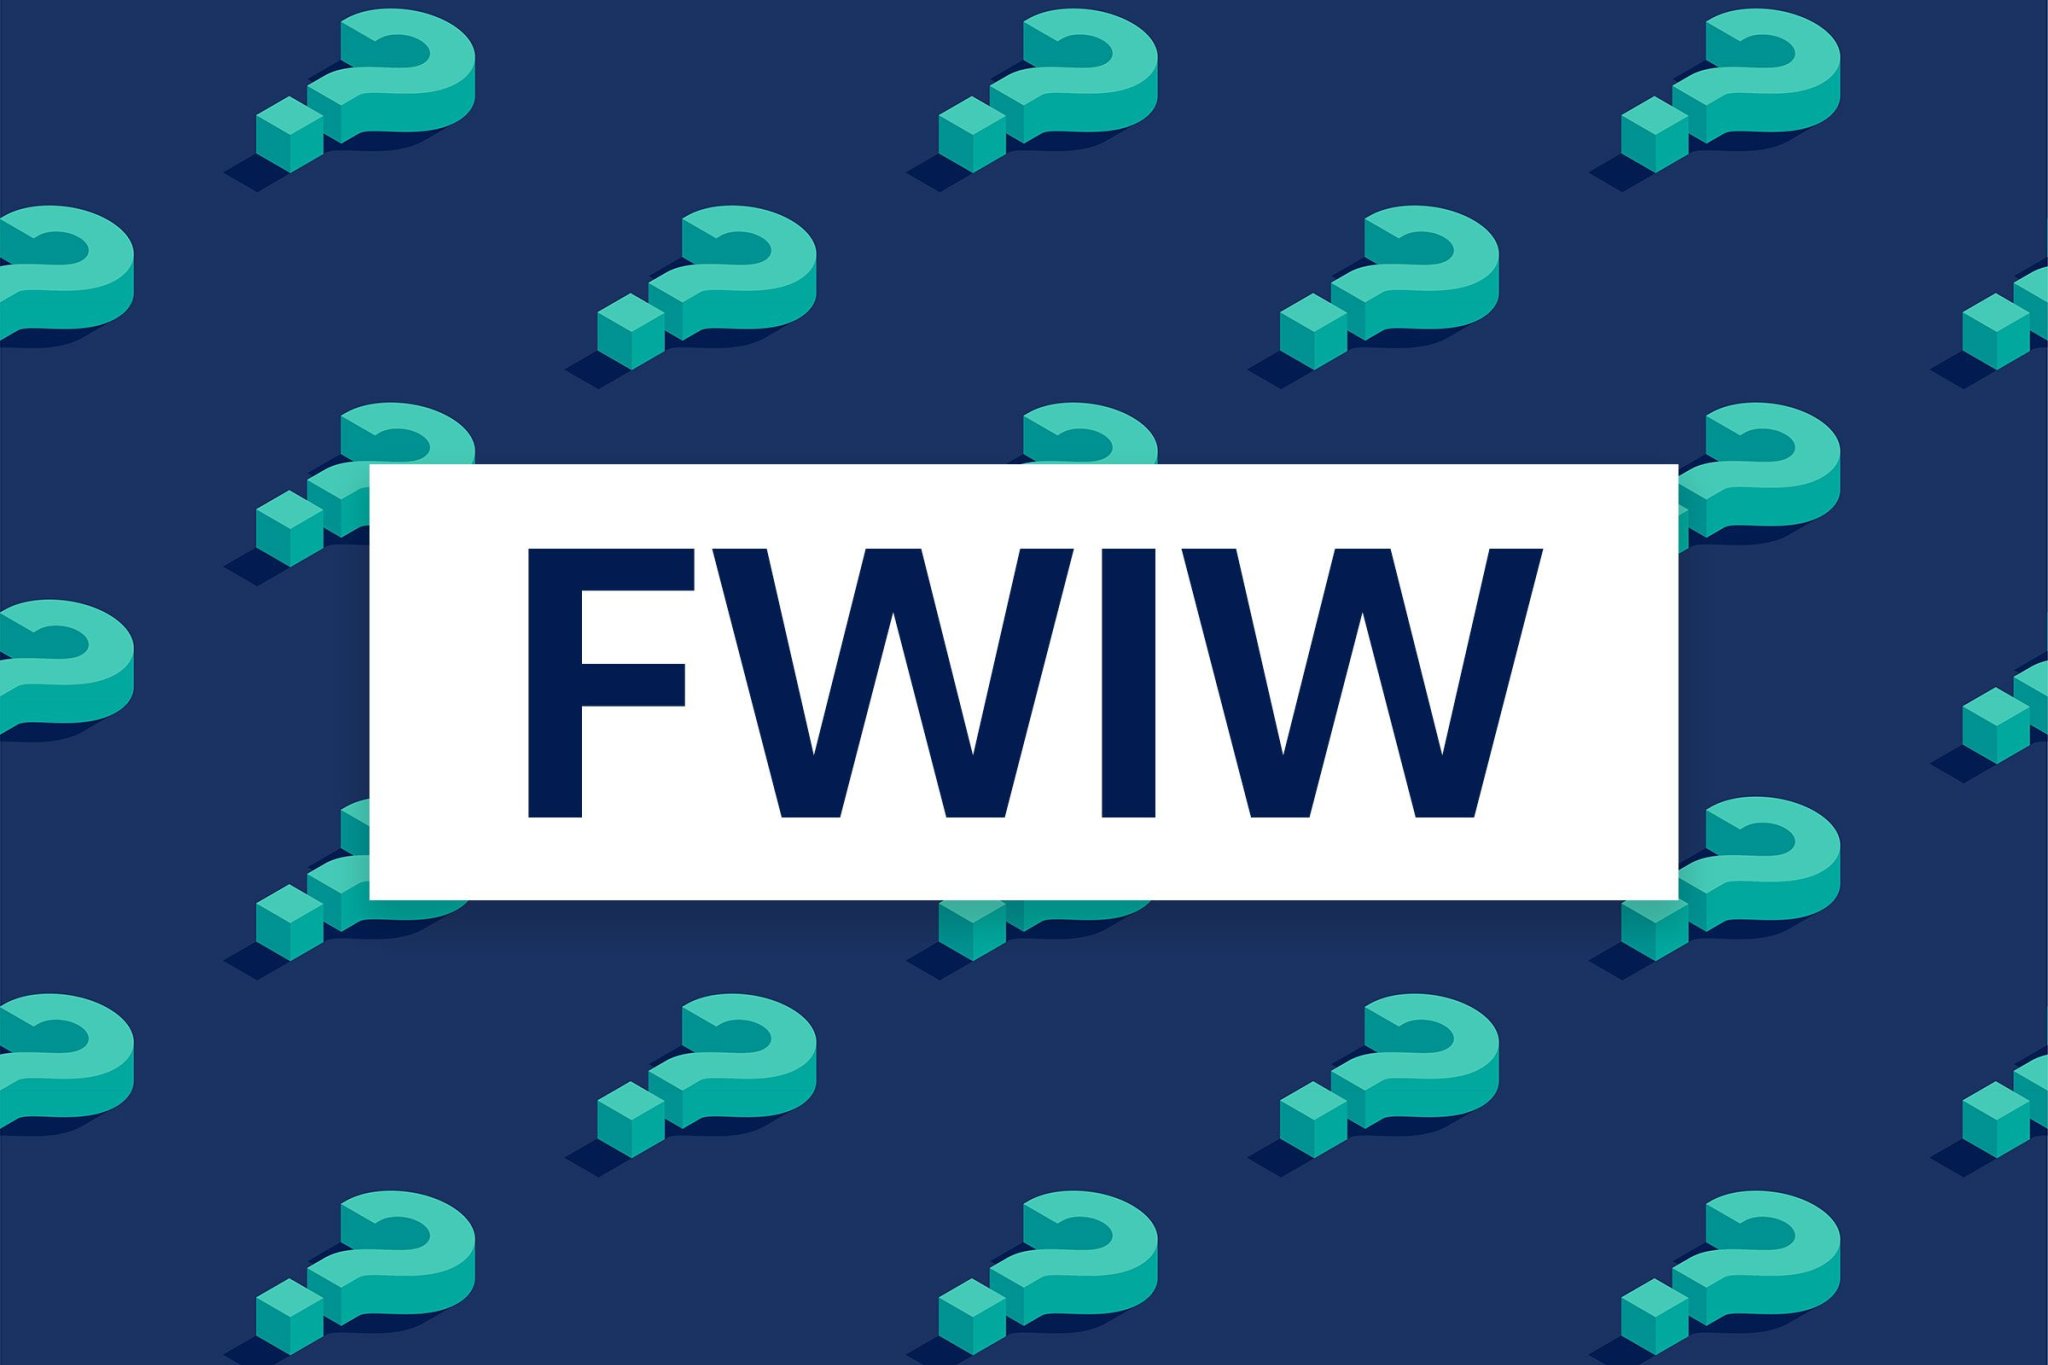 What Does FWIW Mean?